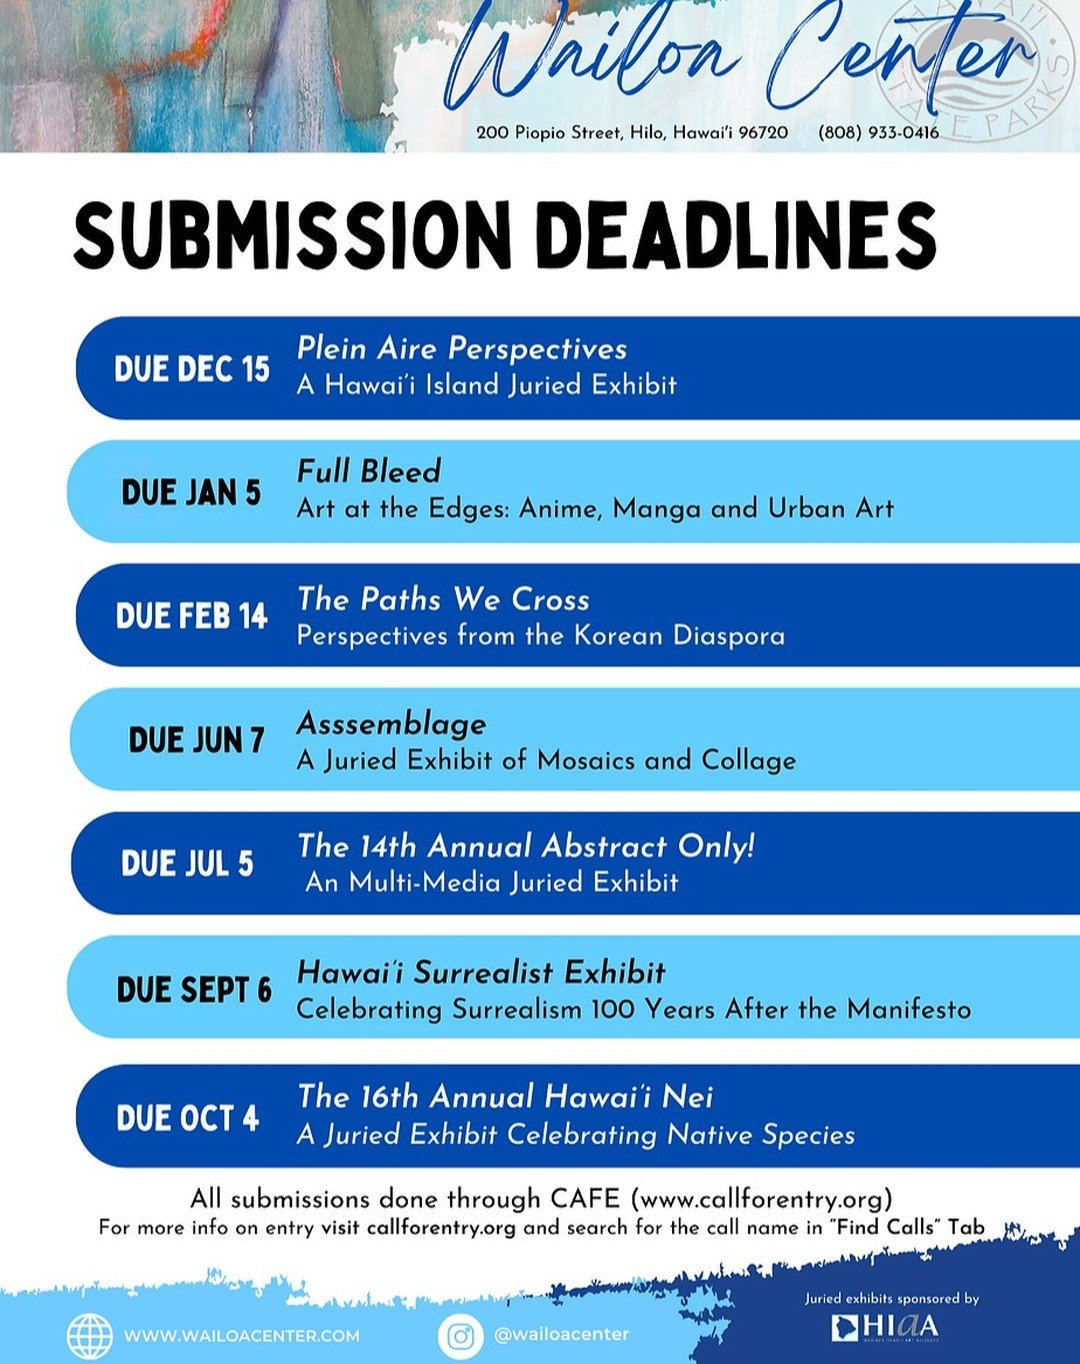 Upcoming Call for Work Deadlines 
for Exhibitions at Wailoa Center in Hilo

All submissions are through CAFE at www.callforentry.org

Click on &quot;Find Calls&quot; tab on CAFE and search for call title. 

.
.
.
.
#hilo #hawaiiart #callforartists #c